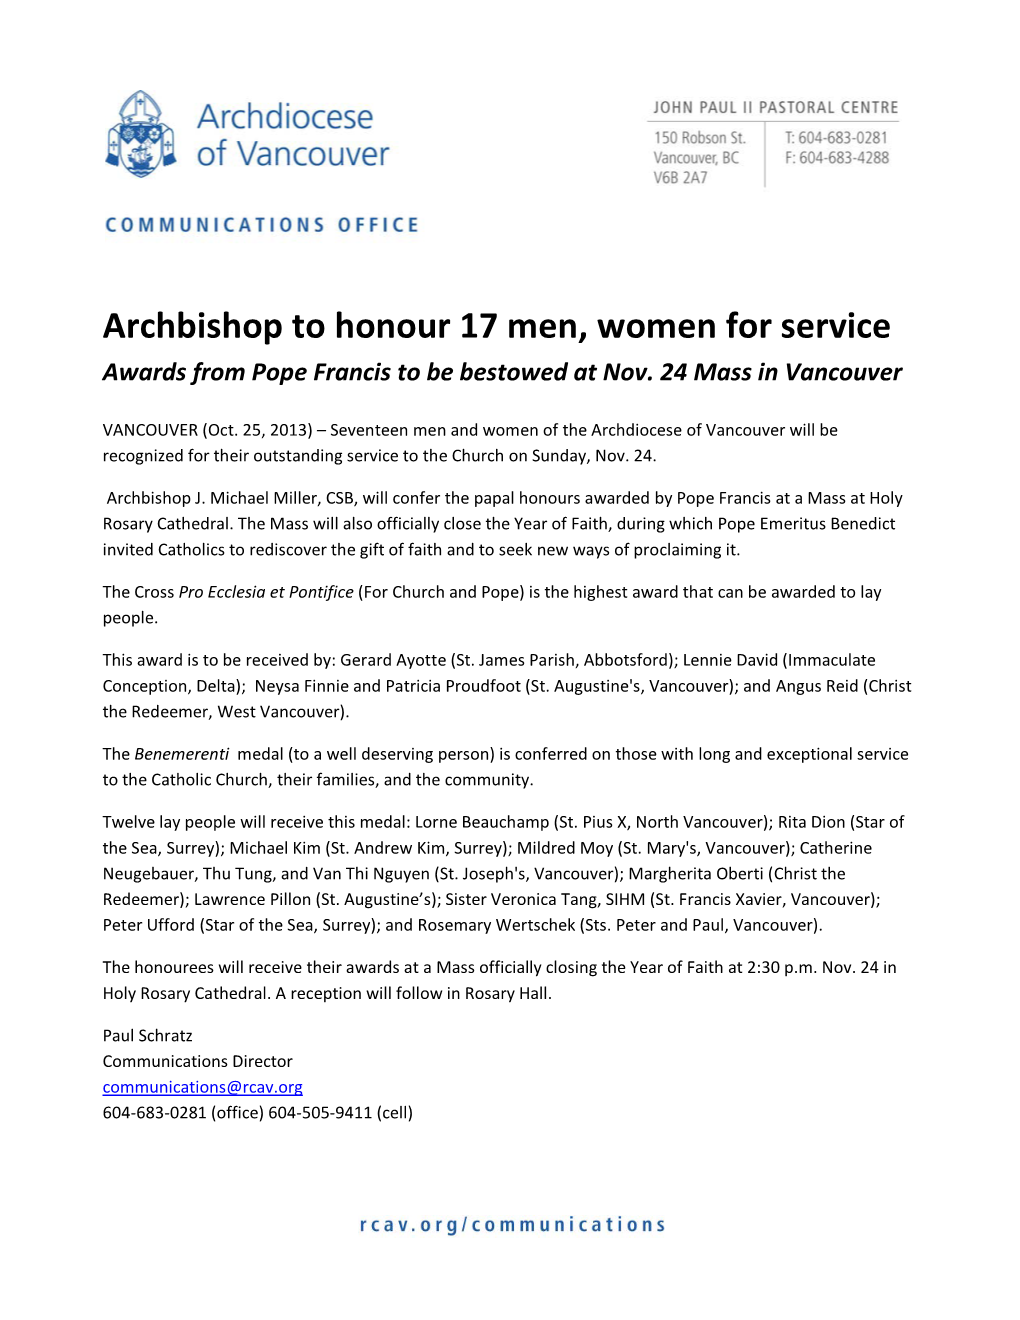 17 Men and Women Are Honoured for Service to the Catholic Church